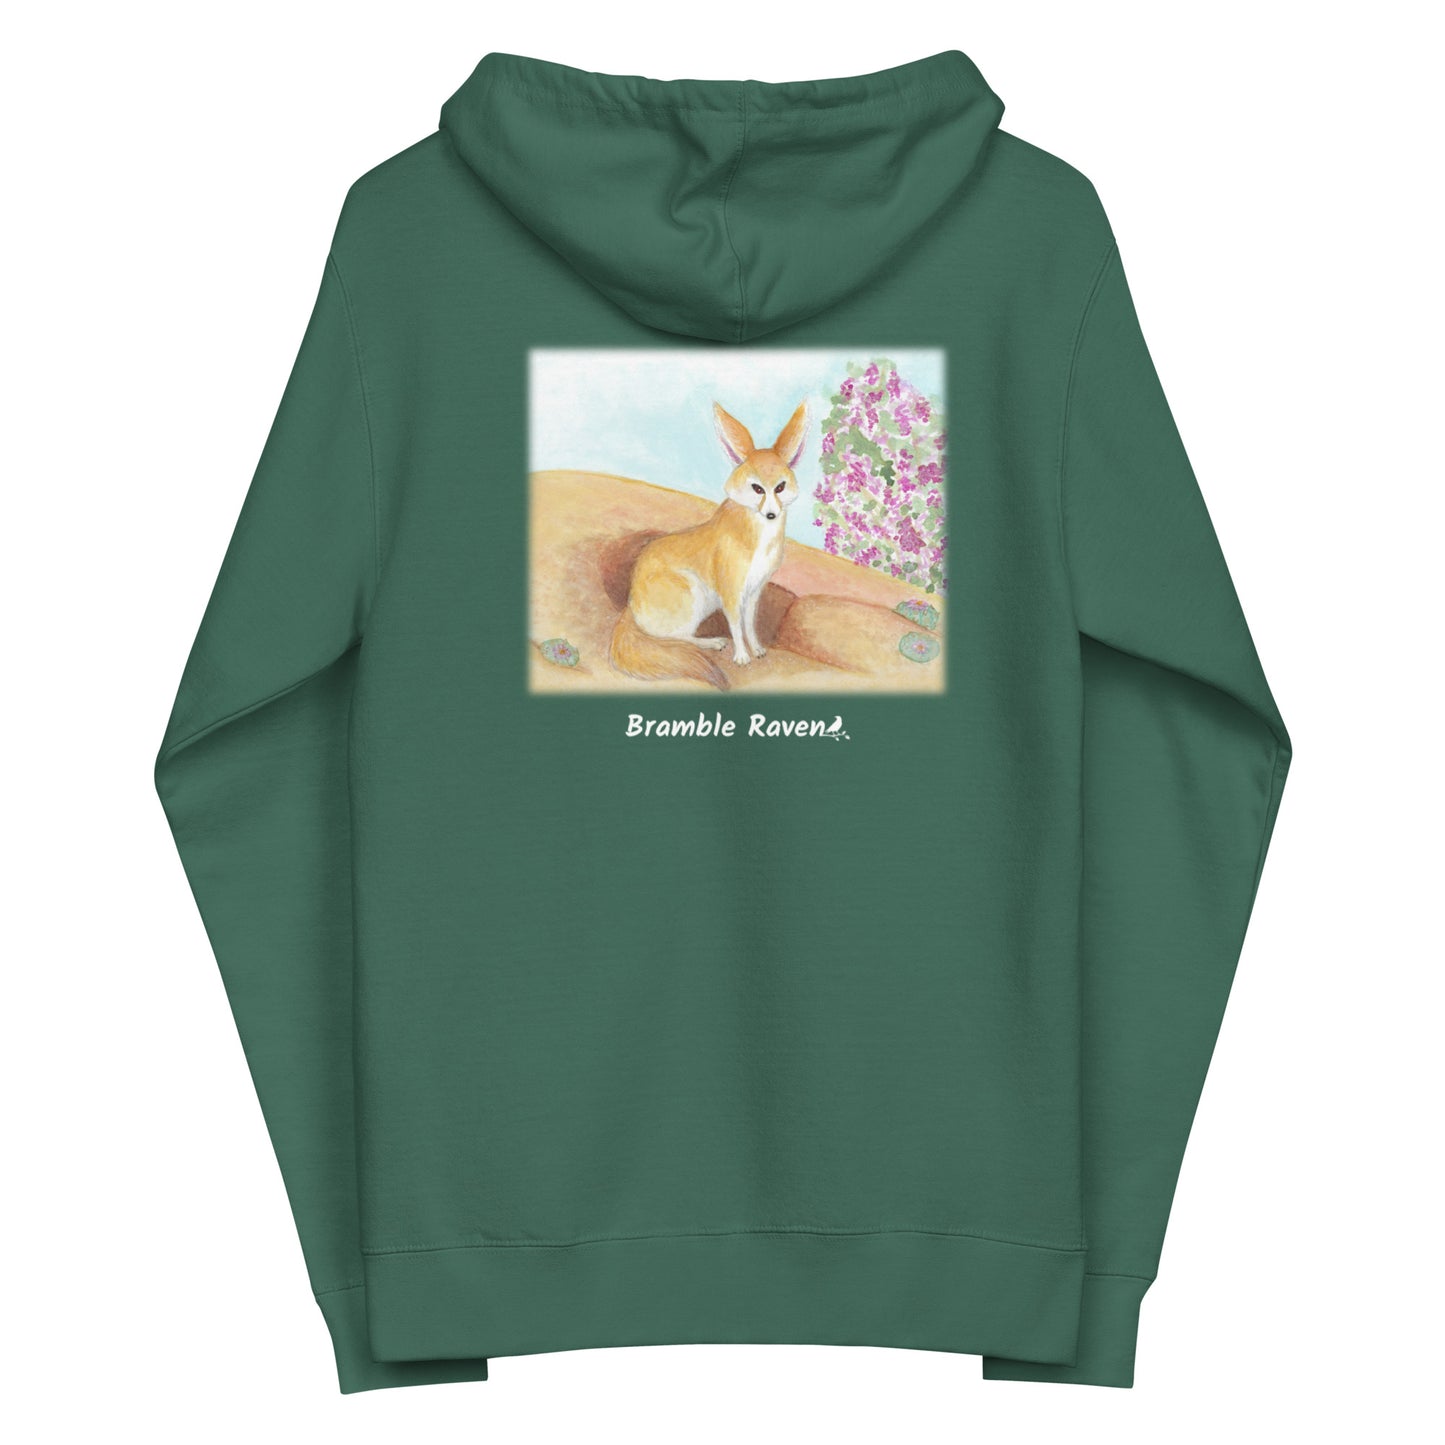 Unisex fleece-lined zip-up alpine green colored hoodie. Features original watercolor painting of a fennec fox in the desert on the back of the hoodie.